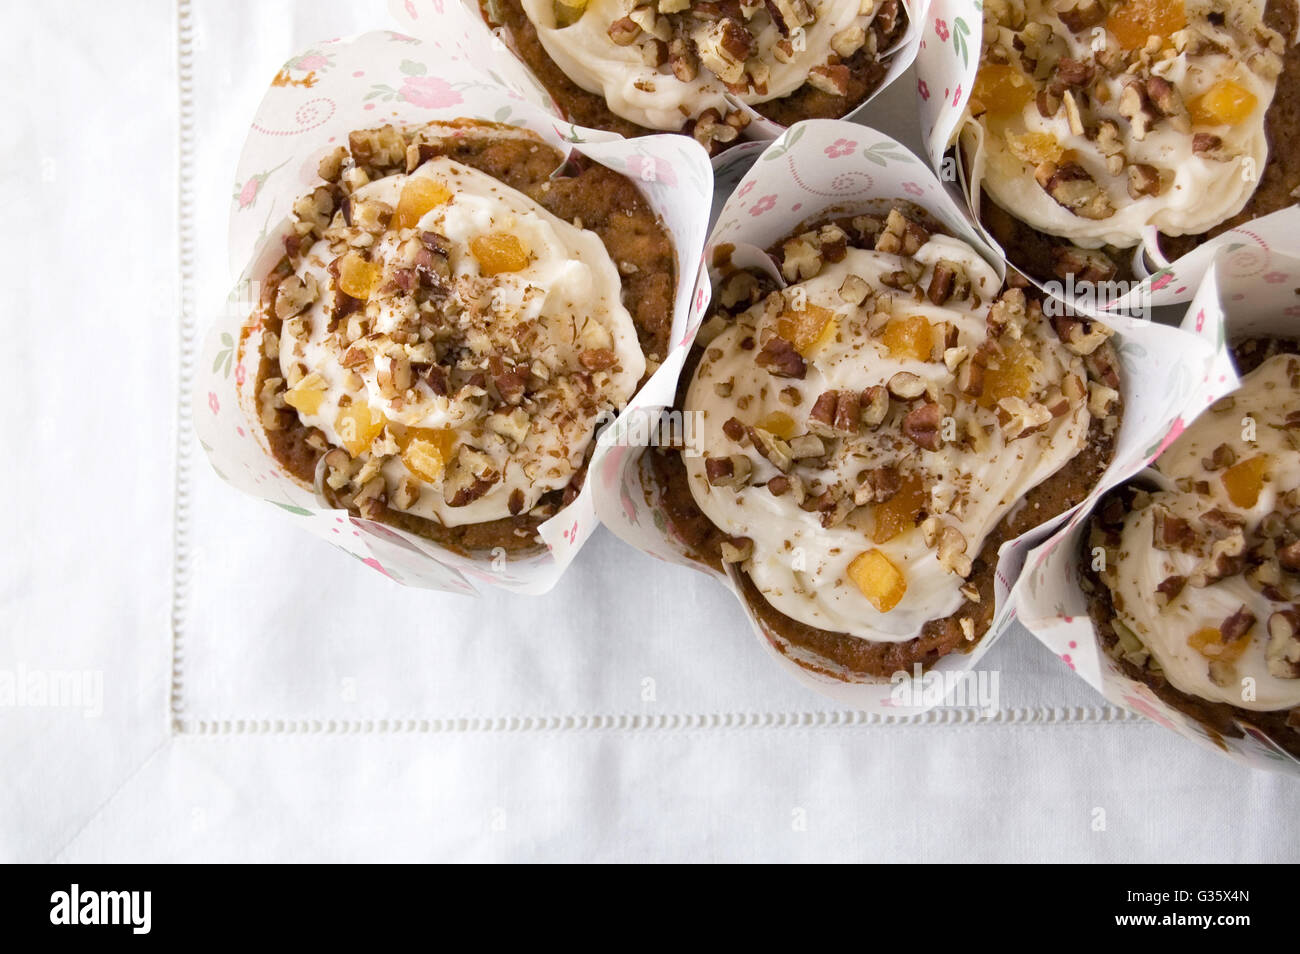 Delicious muffins with candied orange and nuts Stock Photo